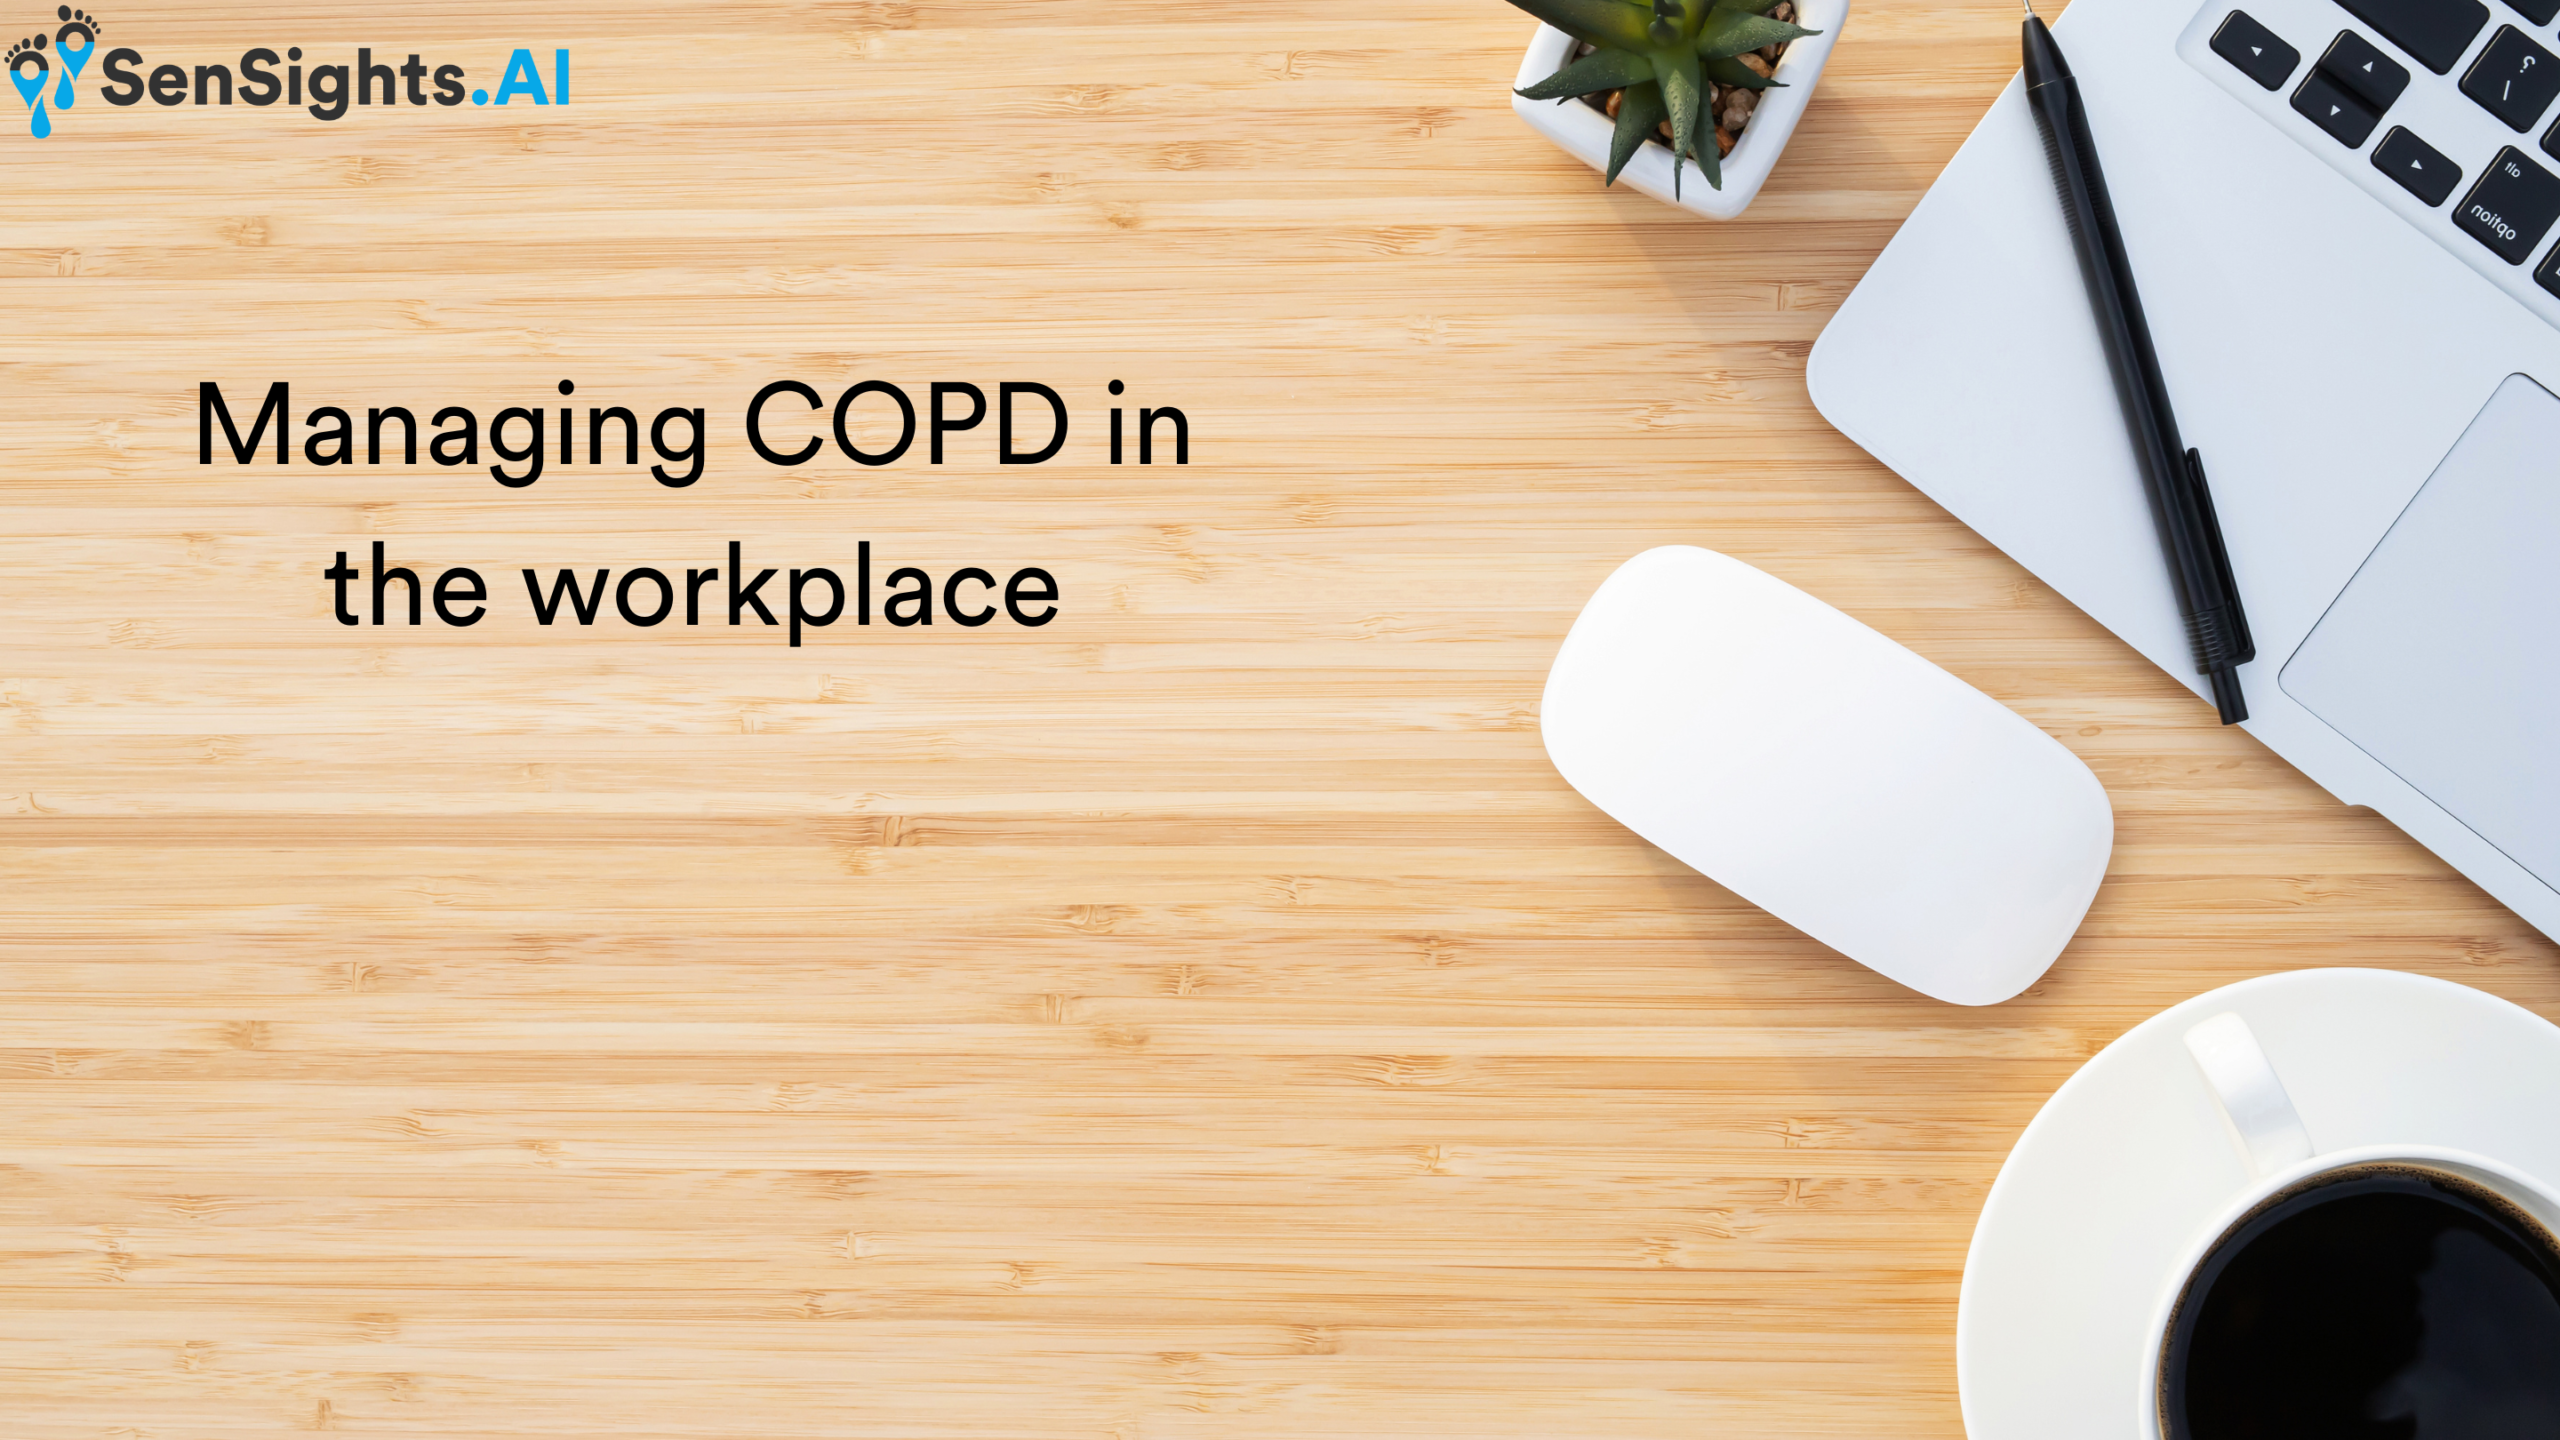 Managing COPD in the workplace: tips for employees and employers